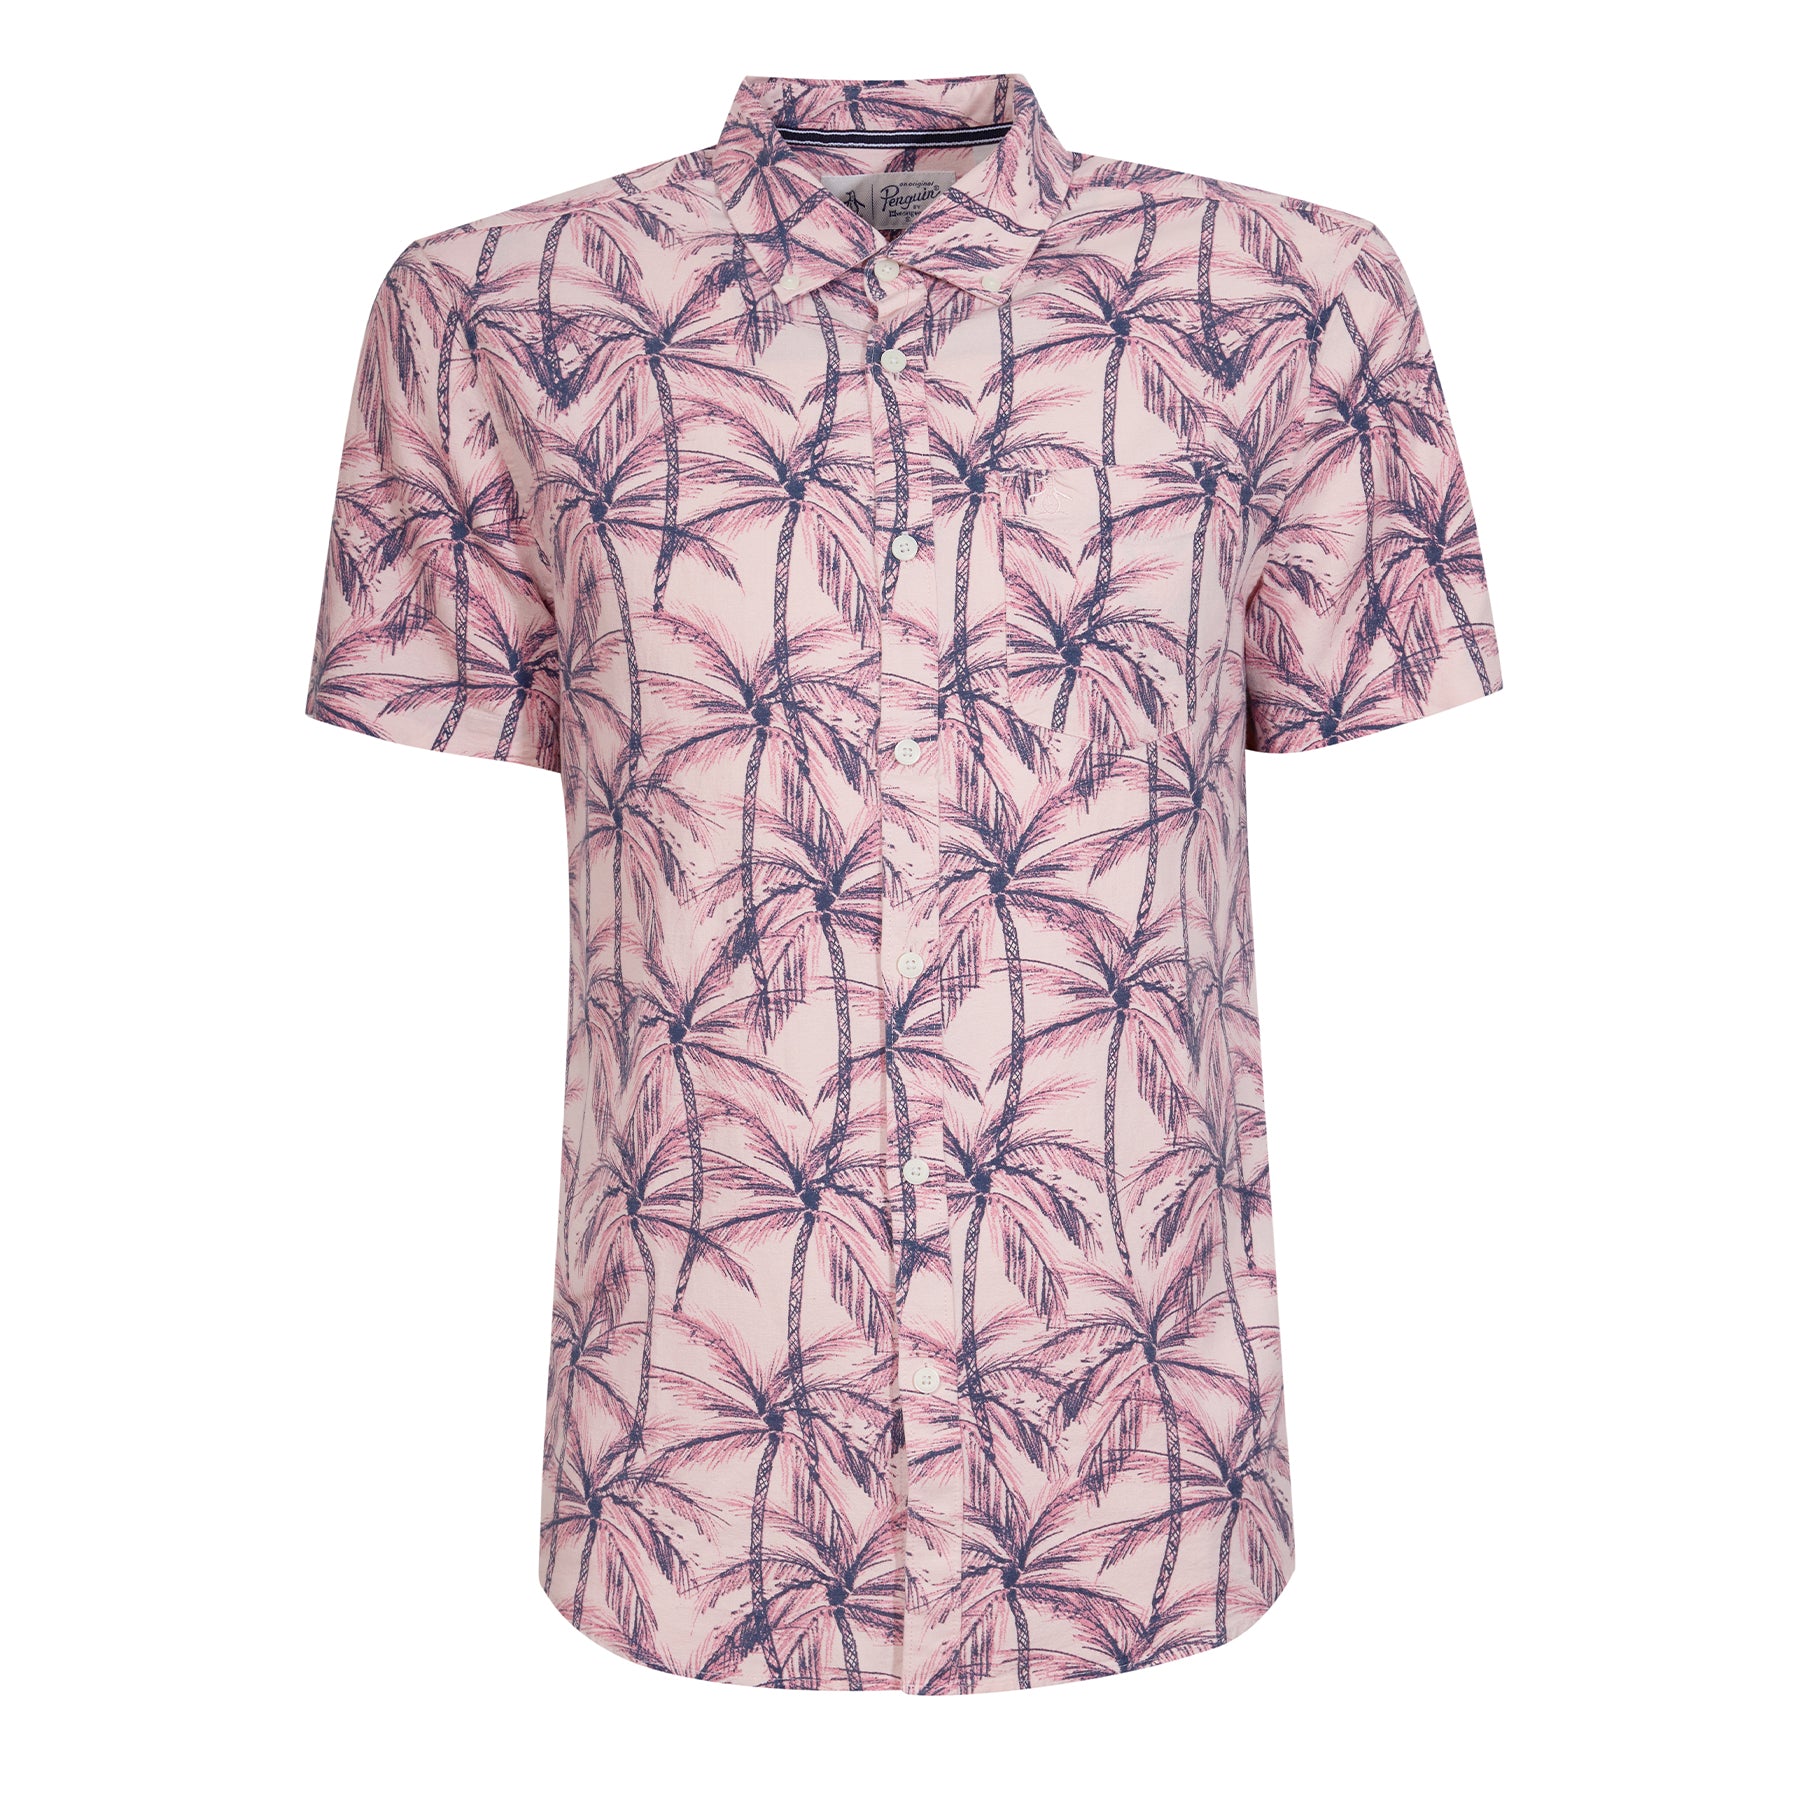 View Ecovero Blend Palms Print Short Sleeve Shirt In Pink Dogwood information